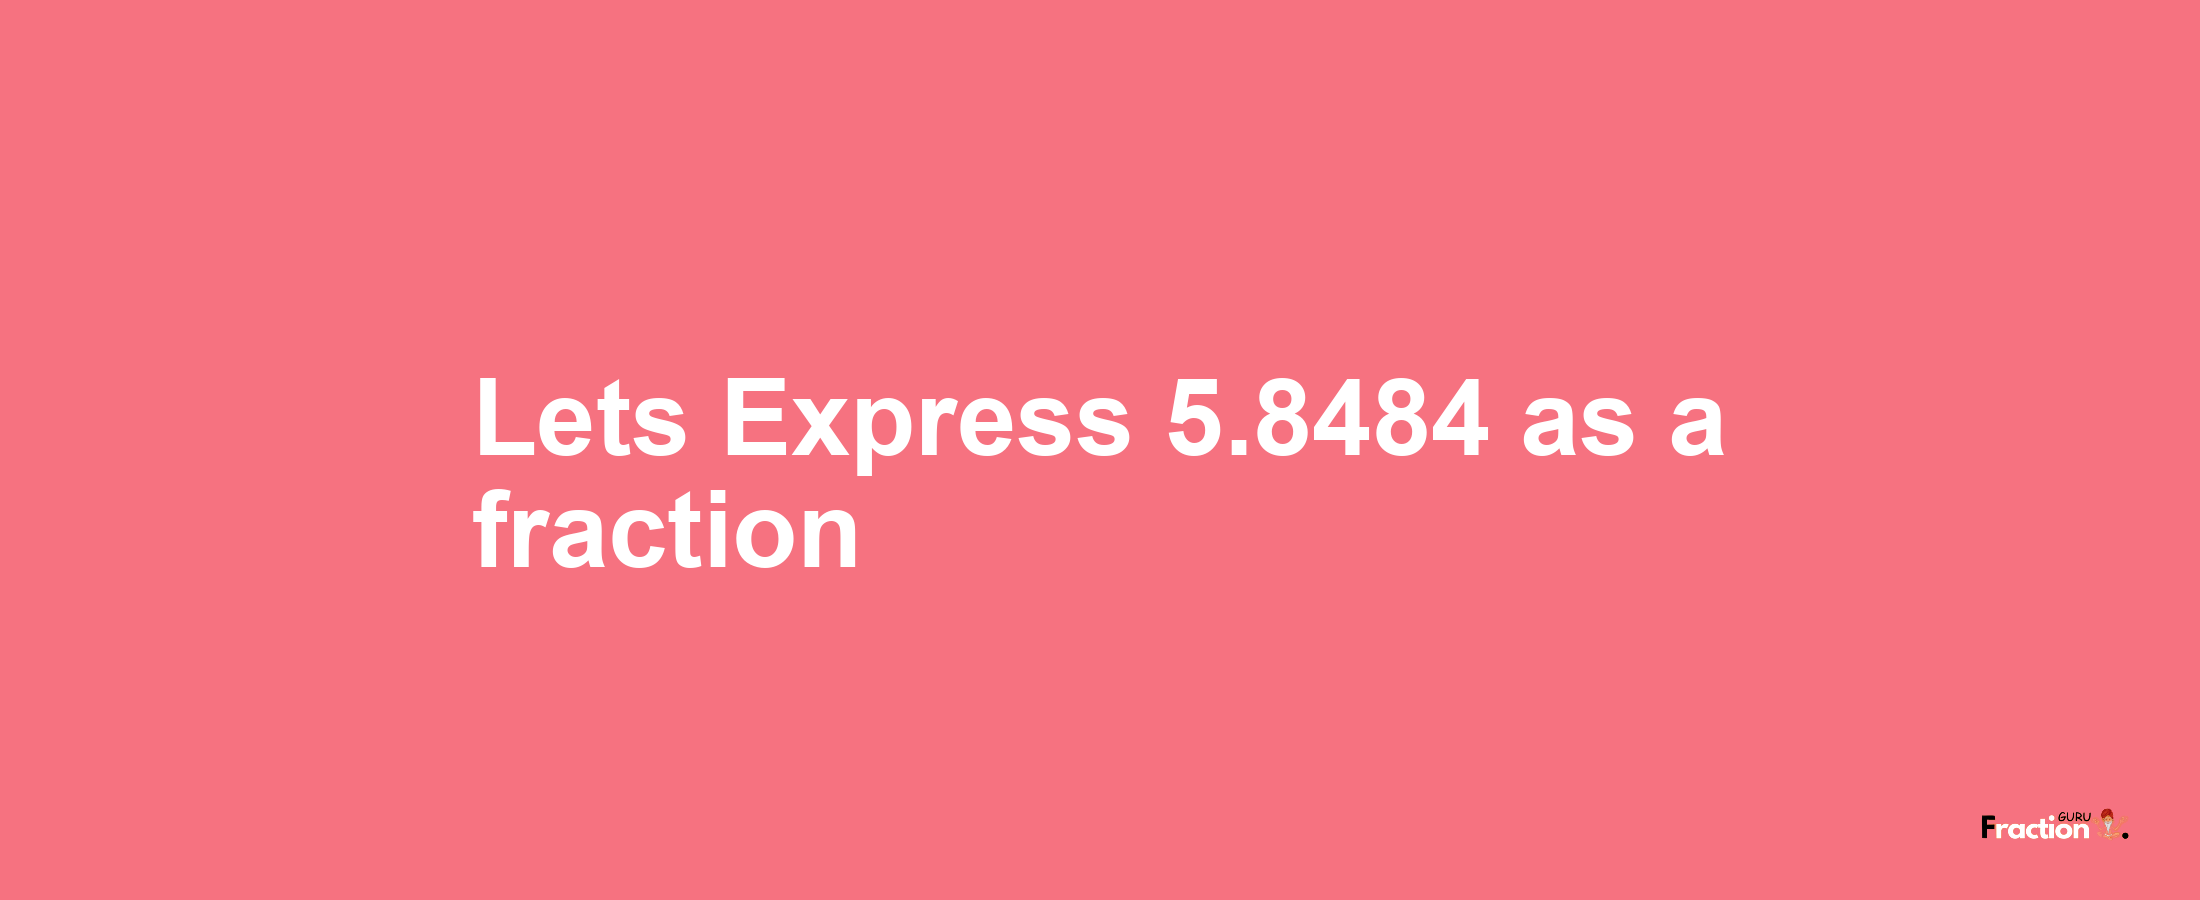 Lets Express 5.8484 as afraction